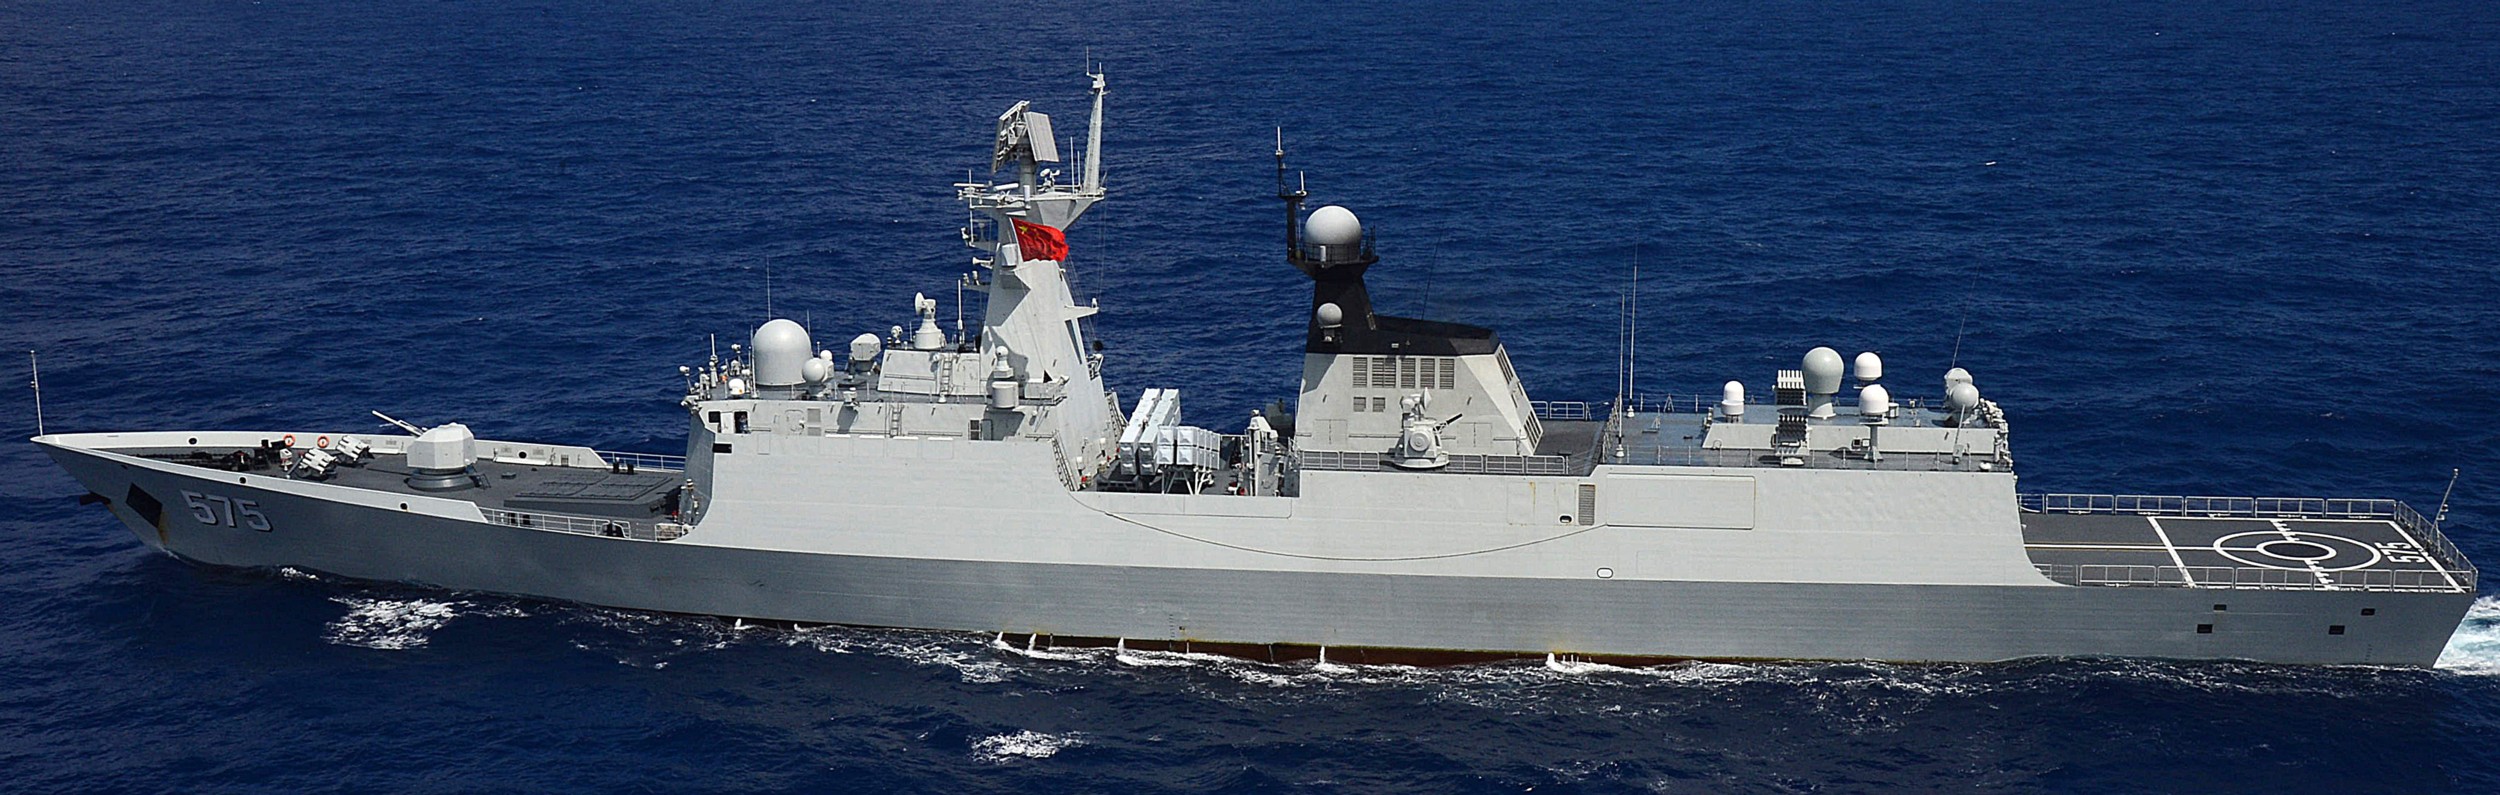 ffg-575 plans yueyang type 054a jiangkai ii class guided missile frigate china people's liberation army navy 02